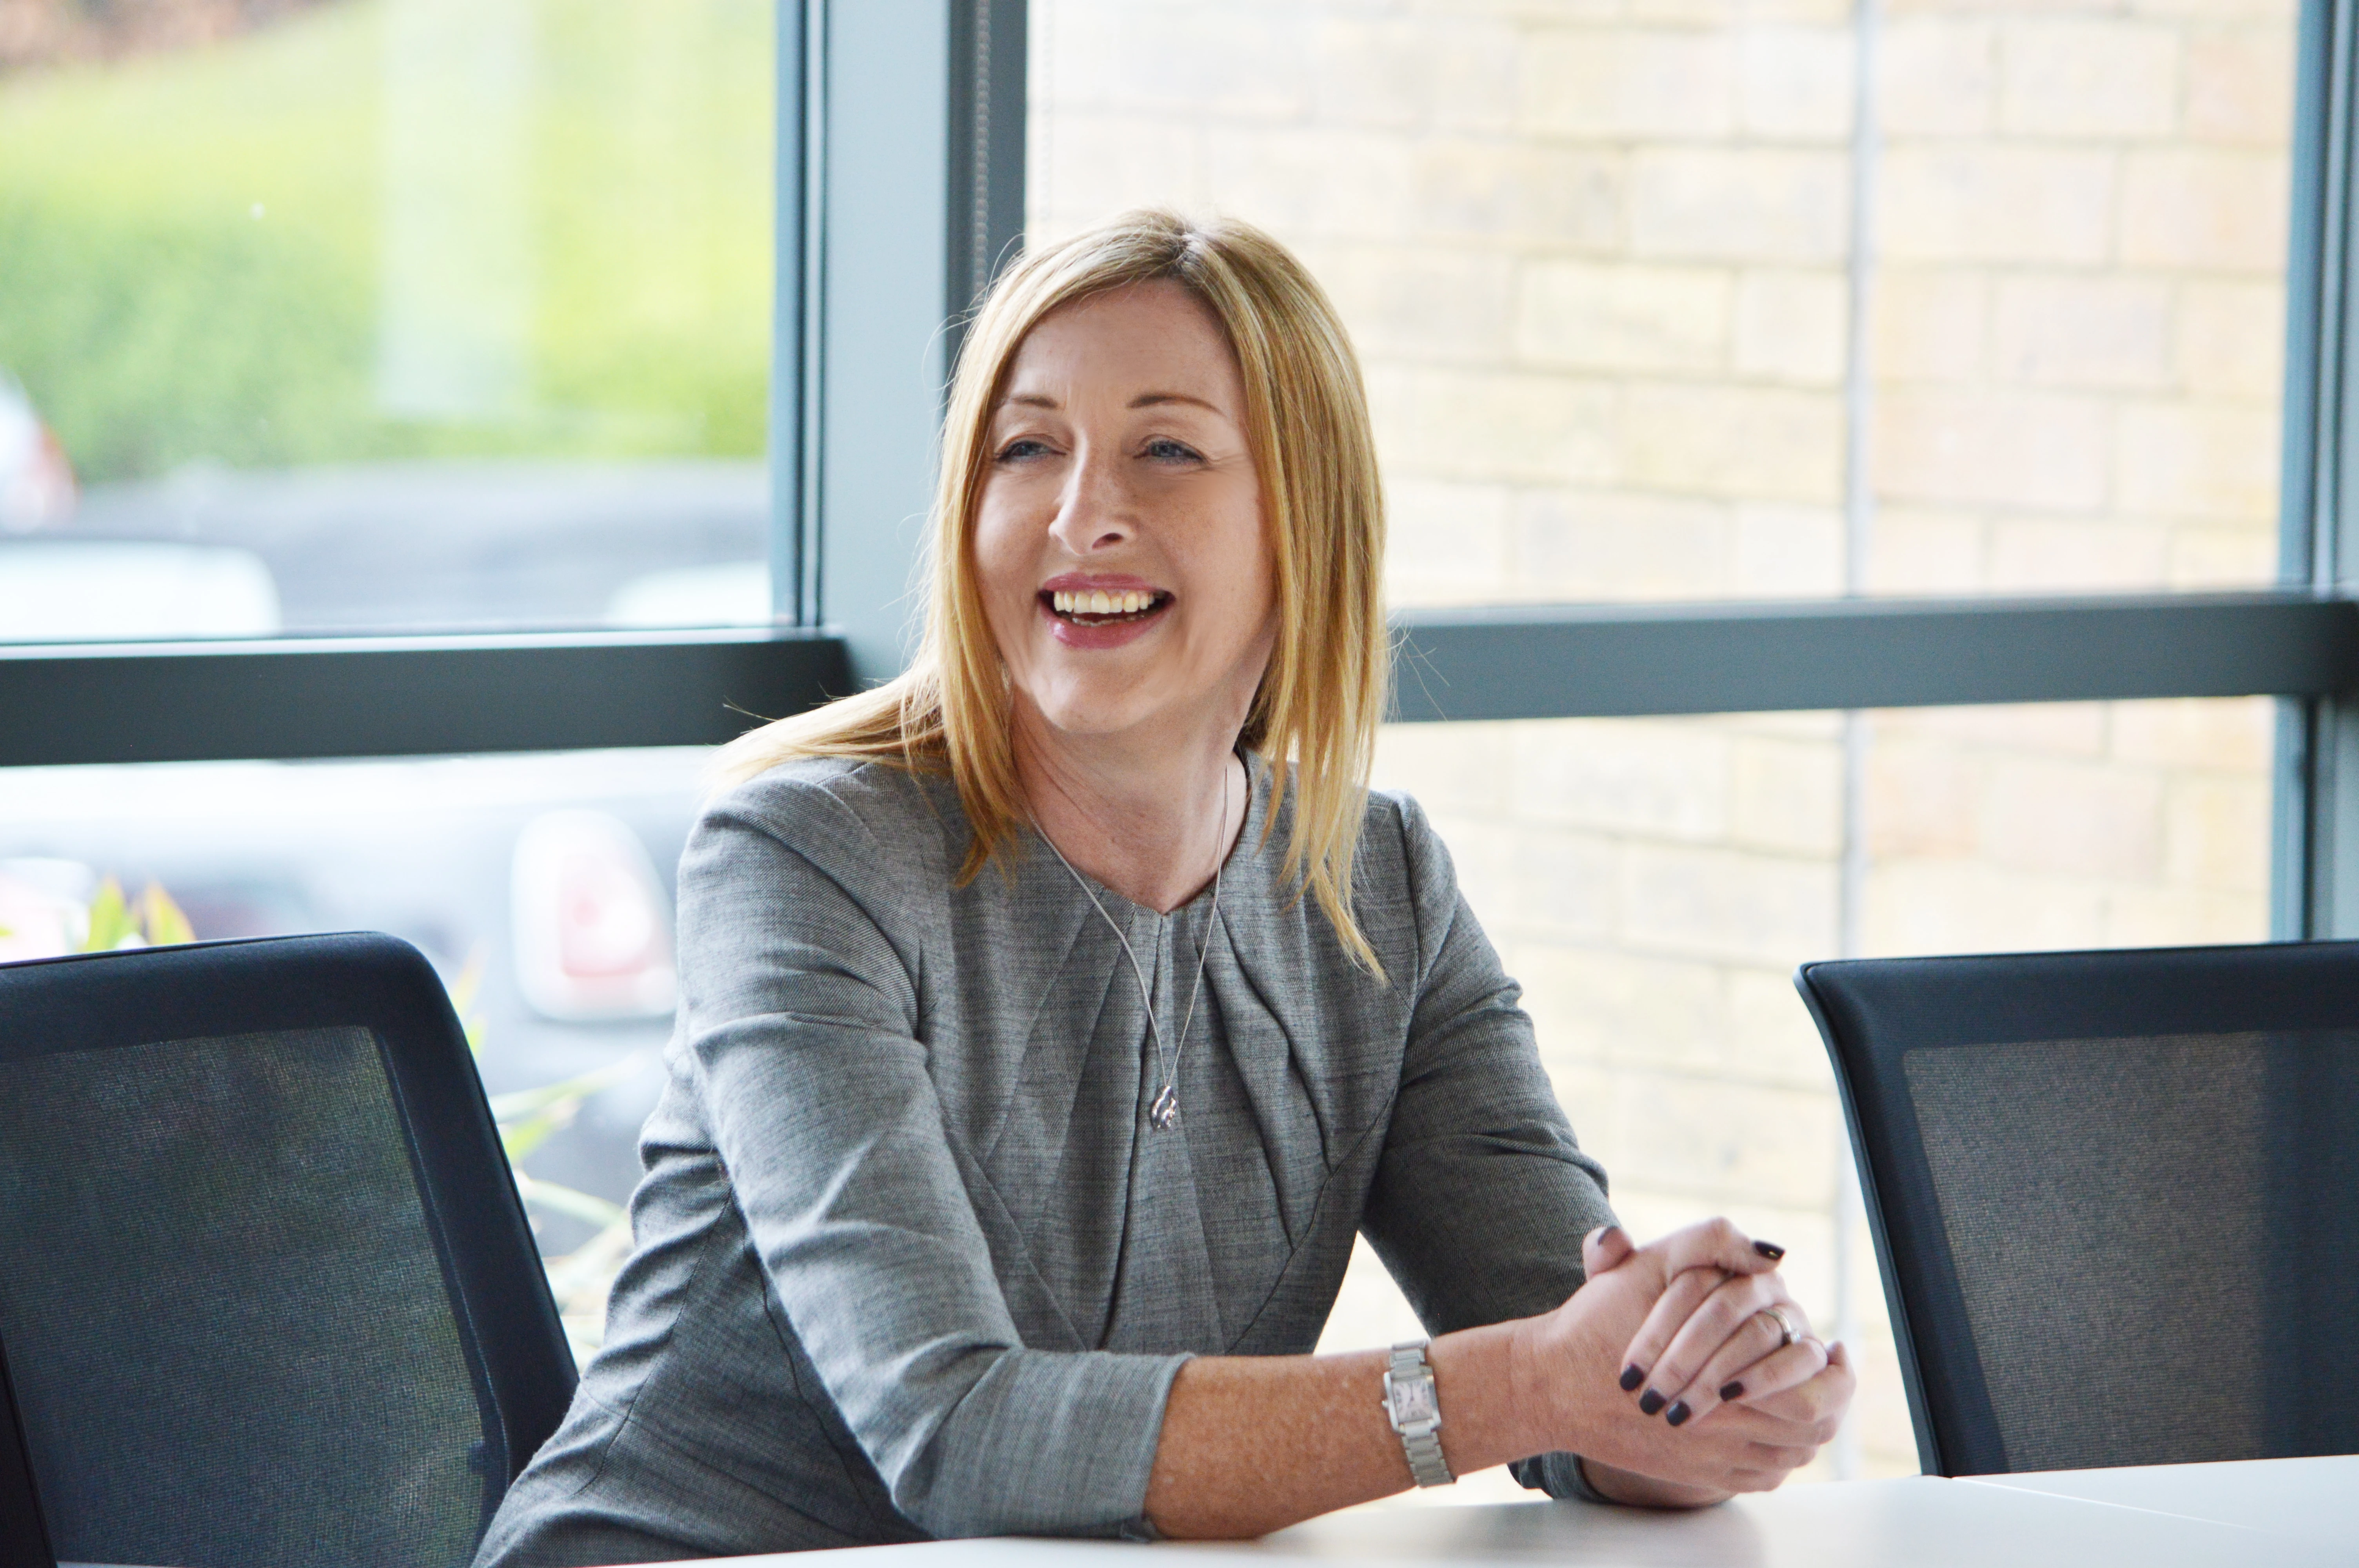 Ruth Jacobs, managing director of recruiter Randstad Business Solutions